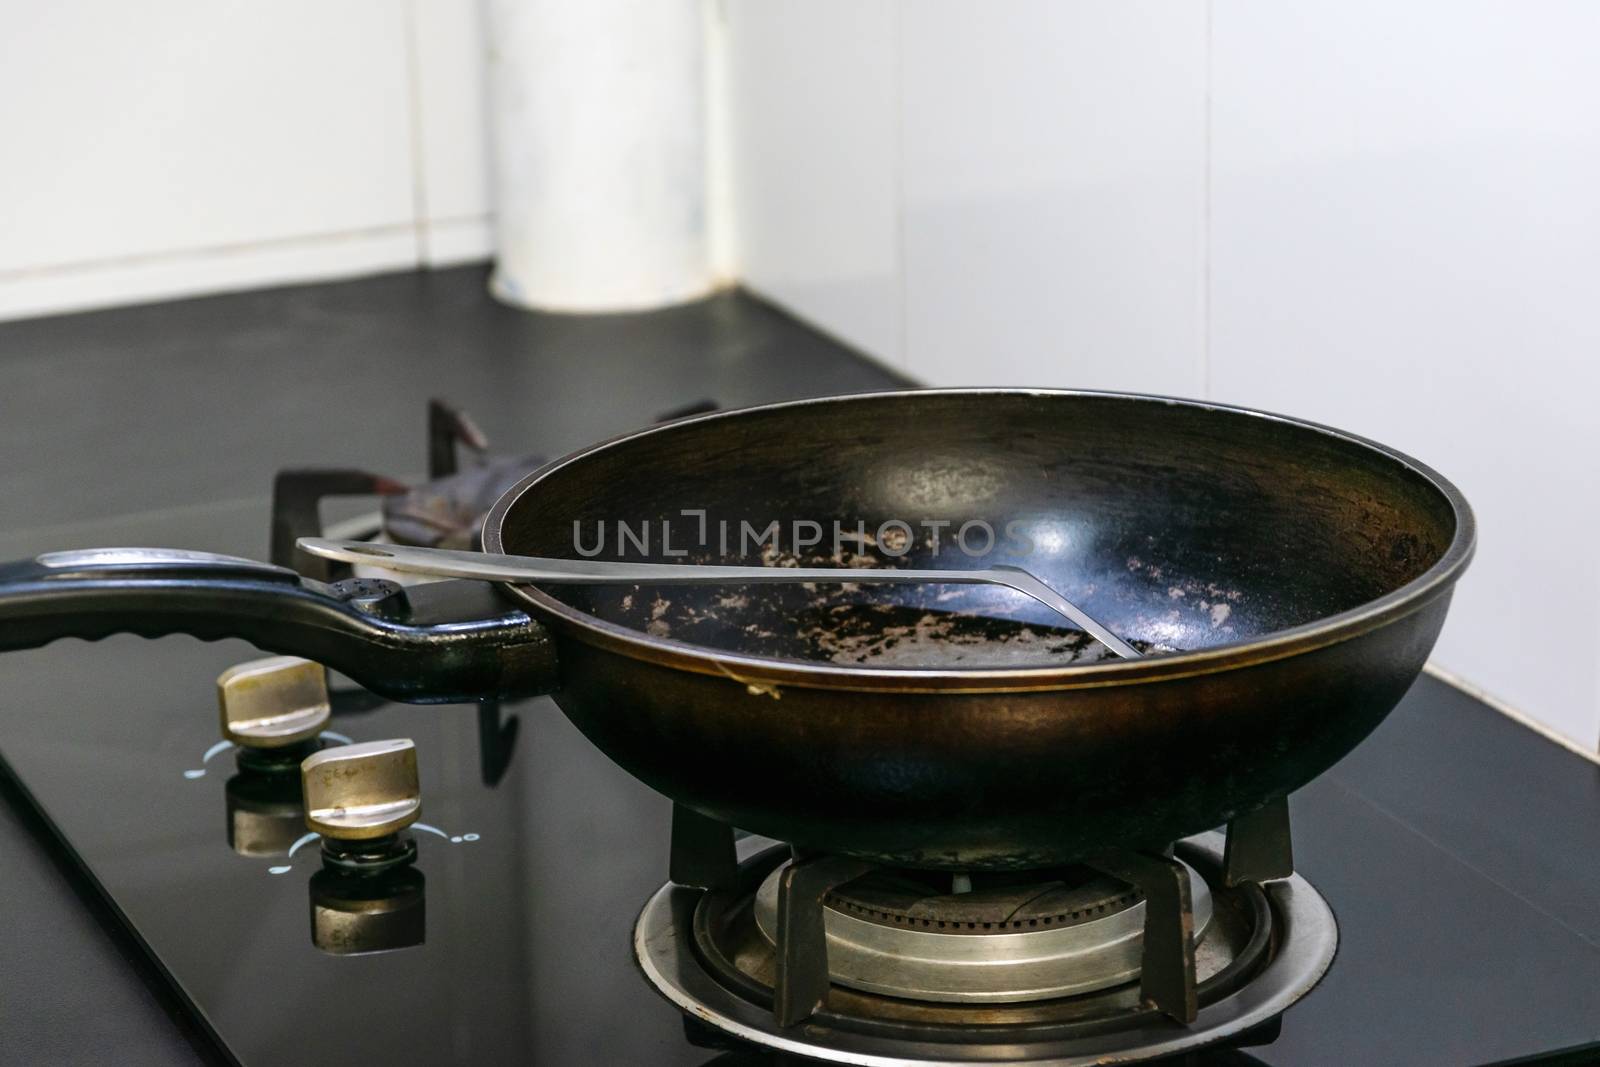 Put the pan on the gas stove, prepare for cooking in the kitchen.